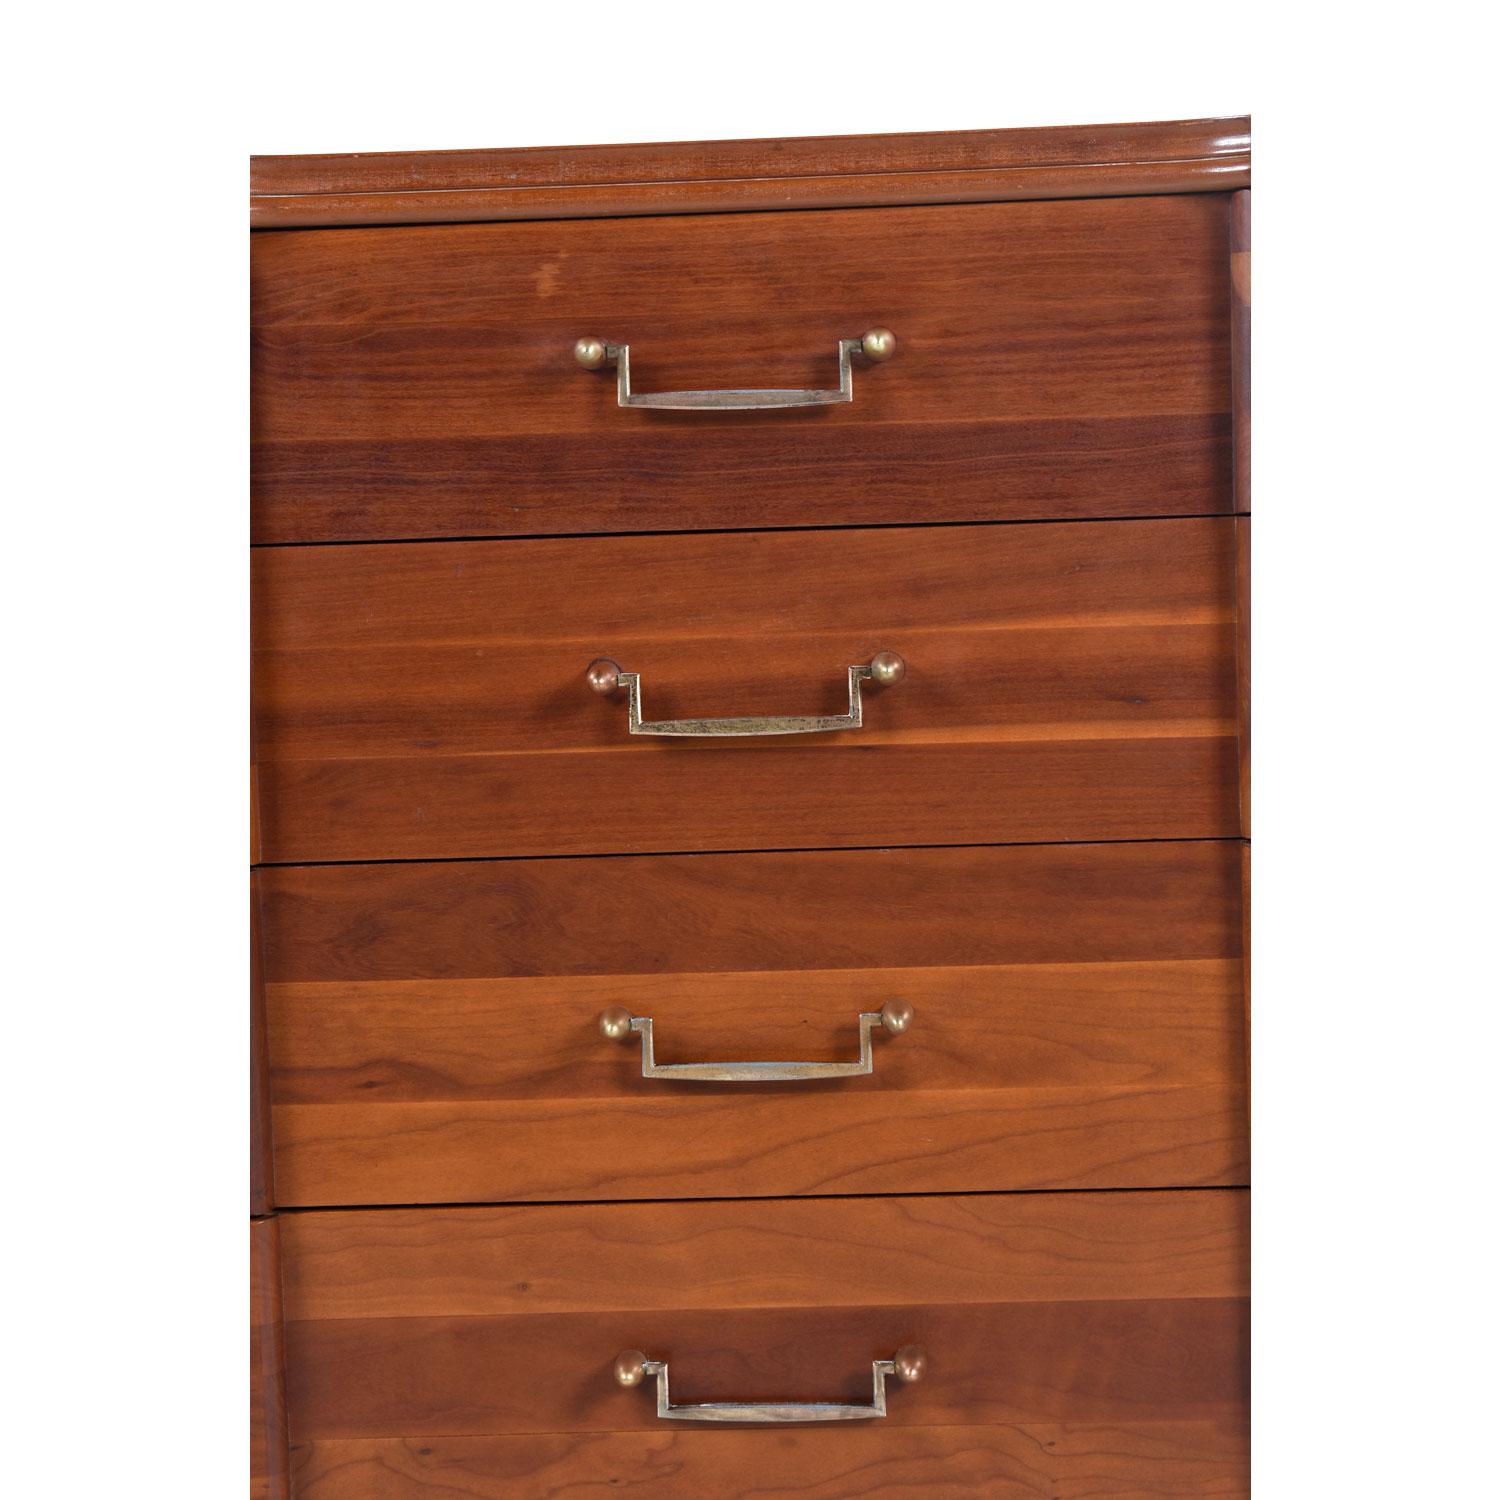 Mid-20th Century Cherry Bachelors Chest by Hickory MFG with Brass Bullet Shaped Handles